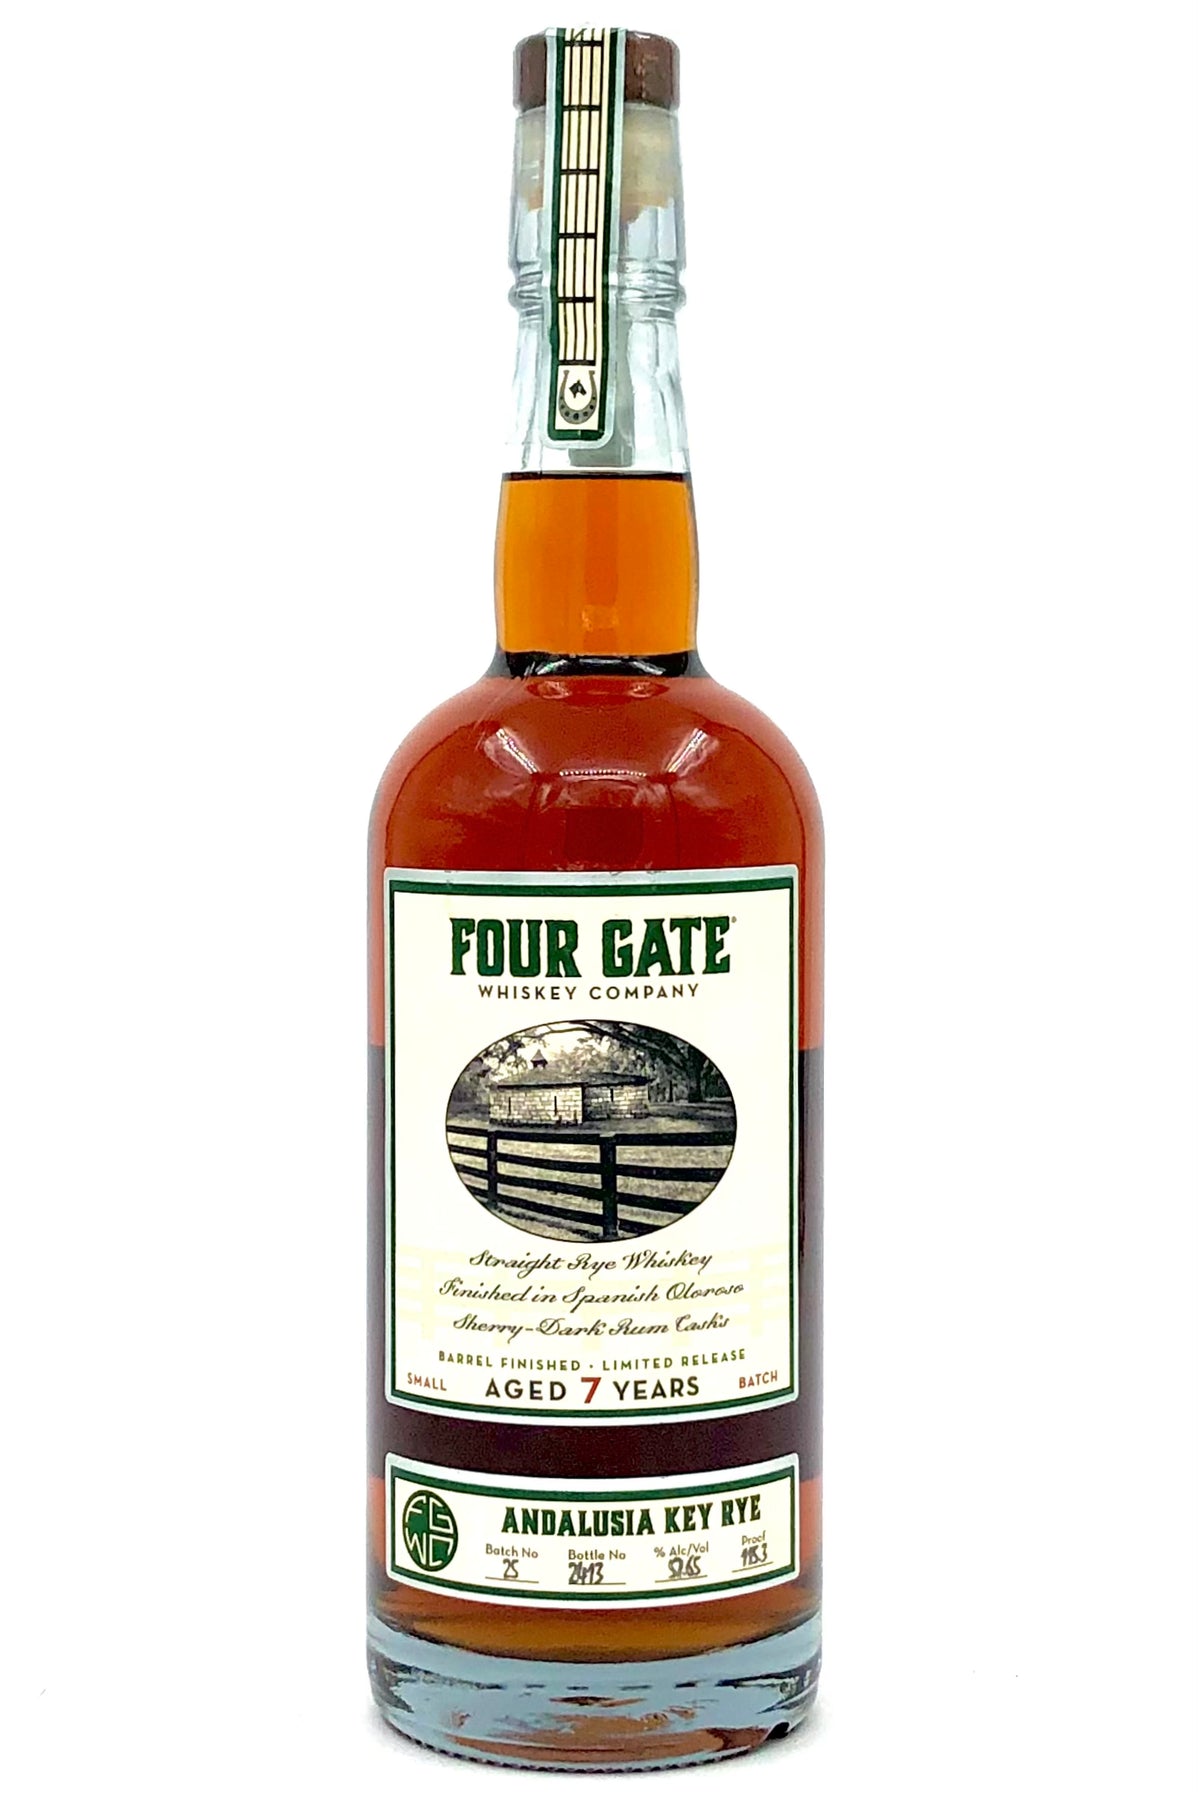 Four Gate Batch 25 Andalusia Key Sherry Rum Casks Finished Straight Rye Whiskey